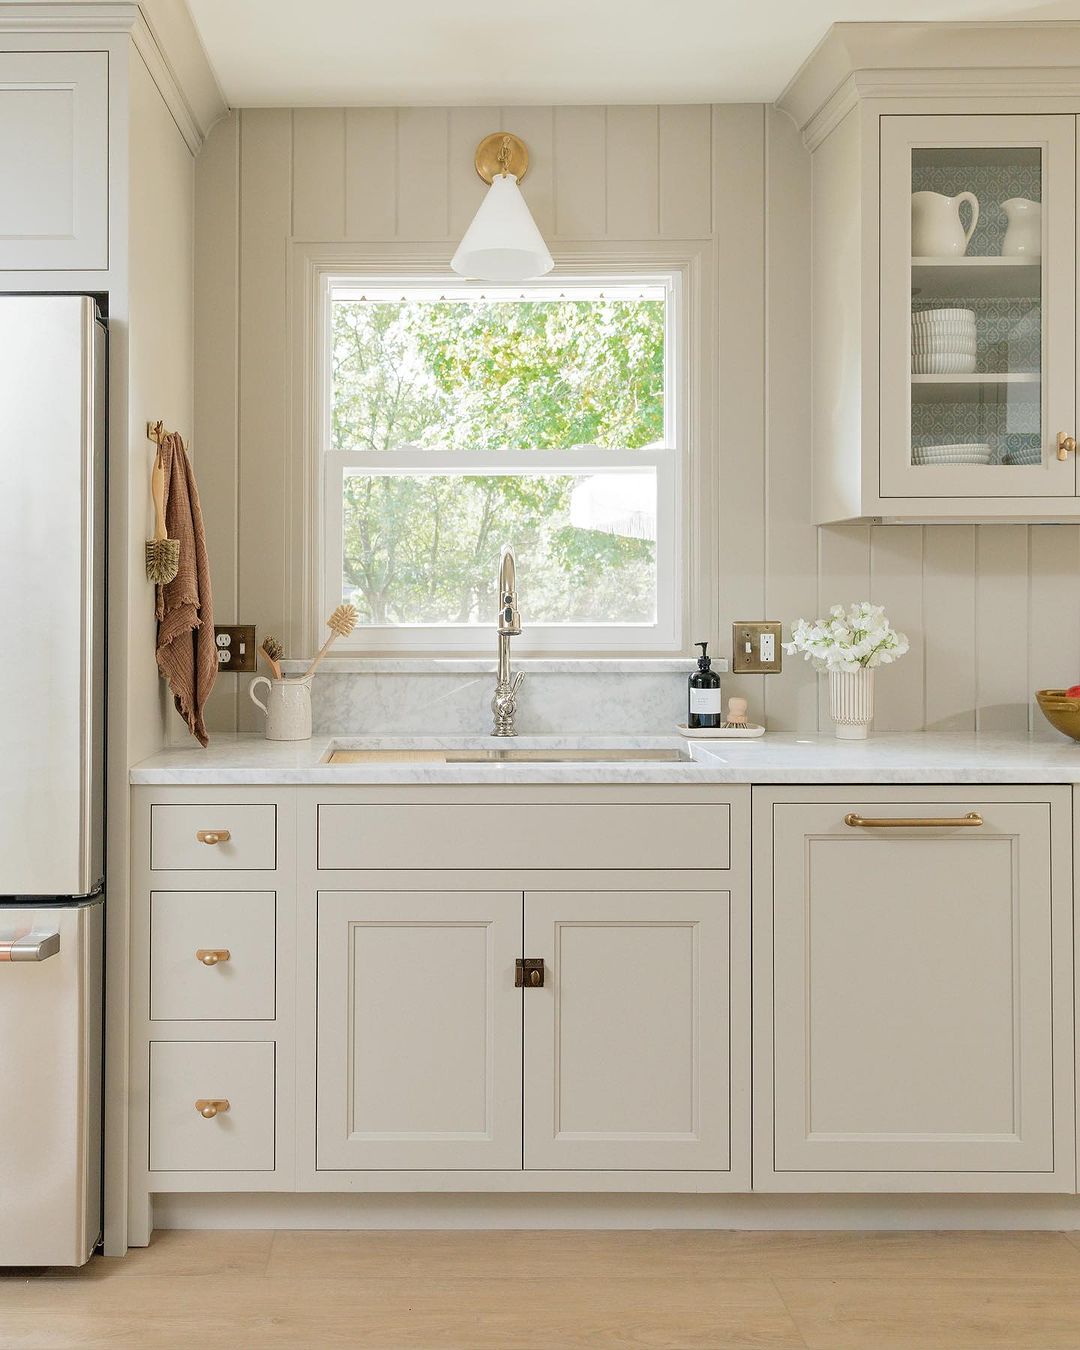 Soft Serenity: Neutral Shaker Kitchen Cabinets with Chic Cabinet Hardware